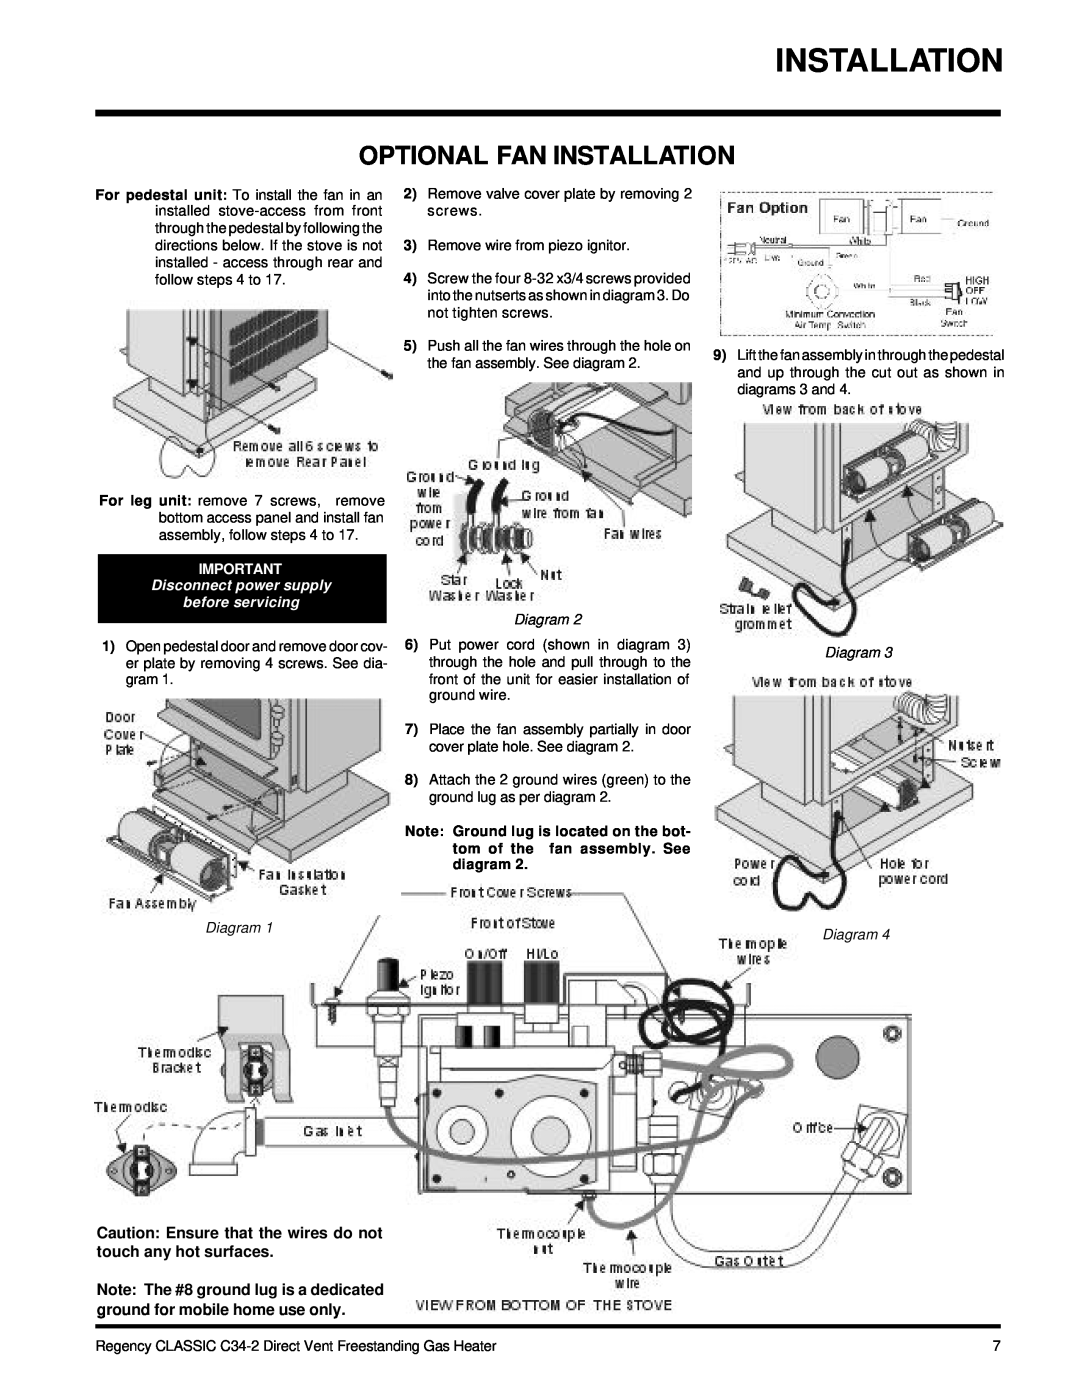 Regency C34-LP2, C34-NG2 installation manual Optional Fan Installation, Disconnect power supply before servicing 